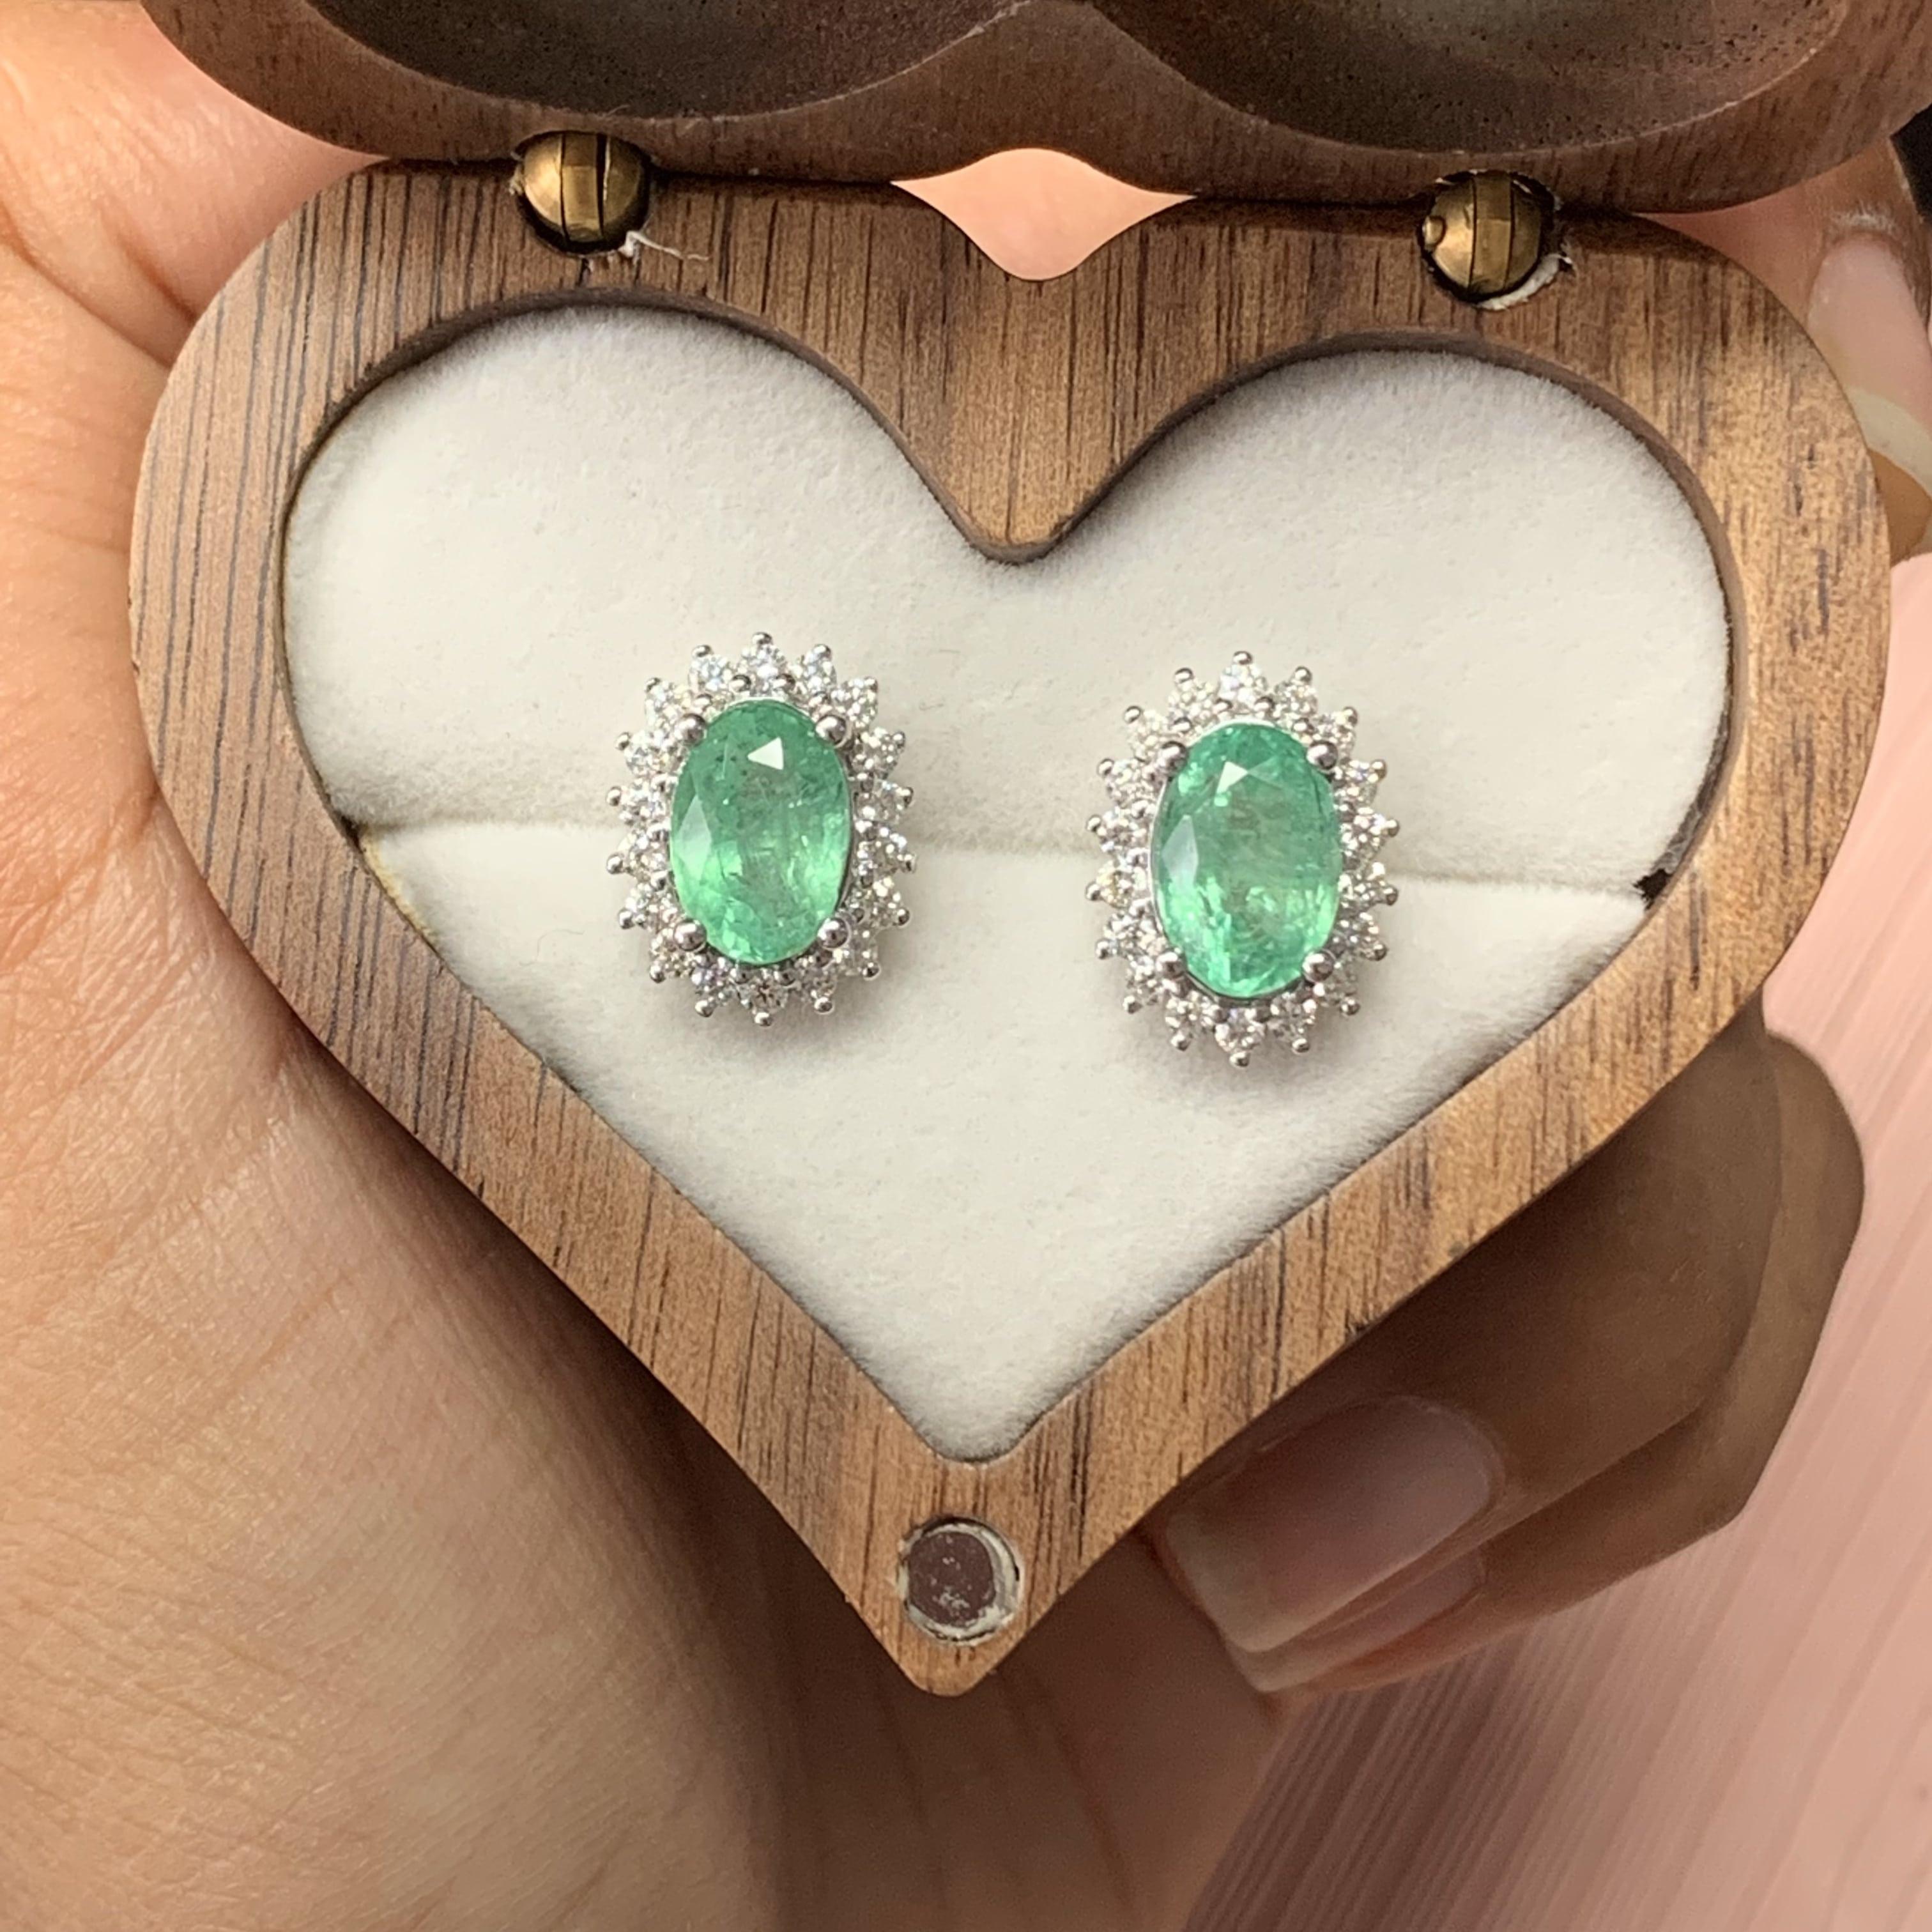 An extremely delightful and classic pair of jewelry featuring these exquisite and elegant, emerald earrings. The emeralds are oval cut and weigh a total of 2.96 Carat. 

These emerald earrings are certified and do come with a certificate.

The